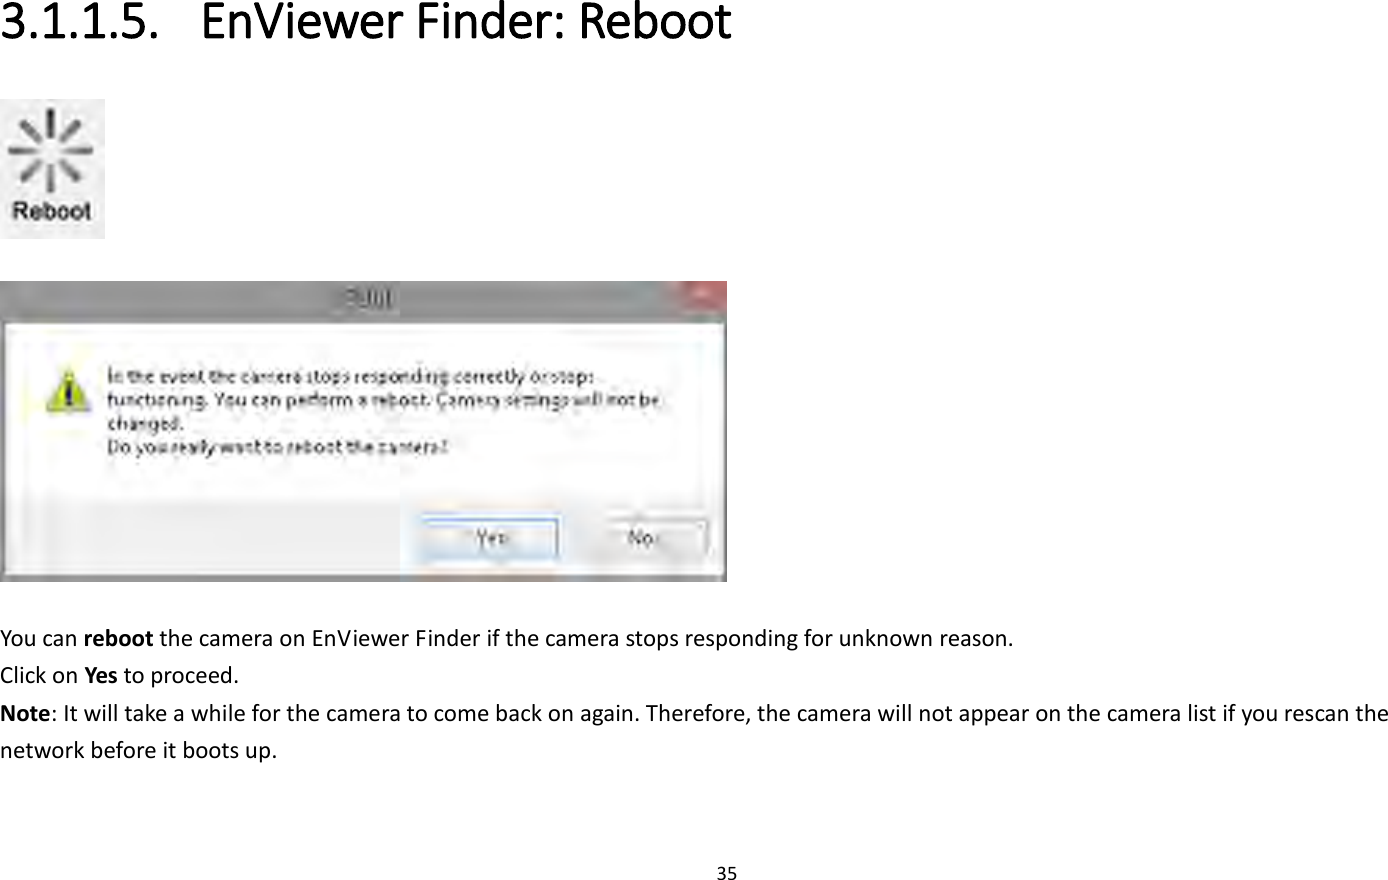 35  3.1.1.5. EnViewer Finder: Reboot     You can reboot the camera on EnViewer Finder if the camera stops responding for unknown reason. Click on Yes to proceed. Note: It will take a while for the camera to come back on again. Therefore, the camera will not appear on the camera list if you rescan the network before it boots up. 